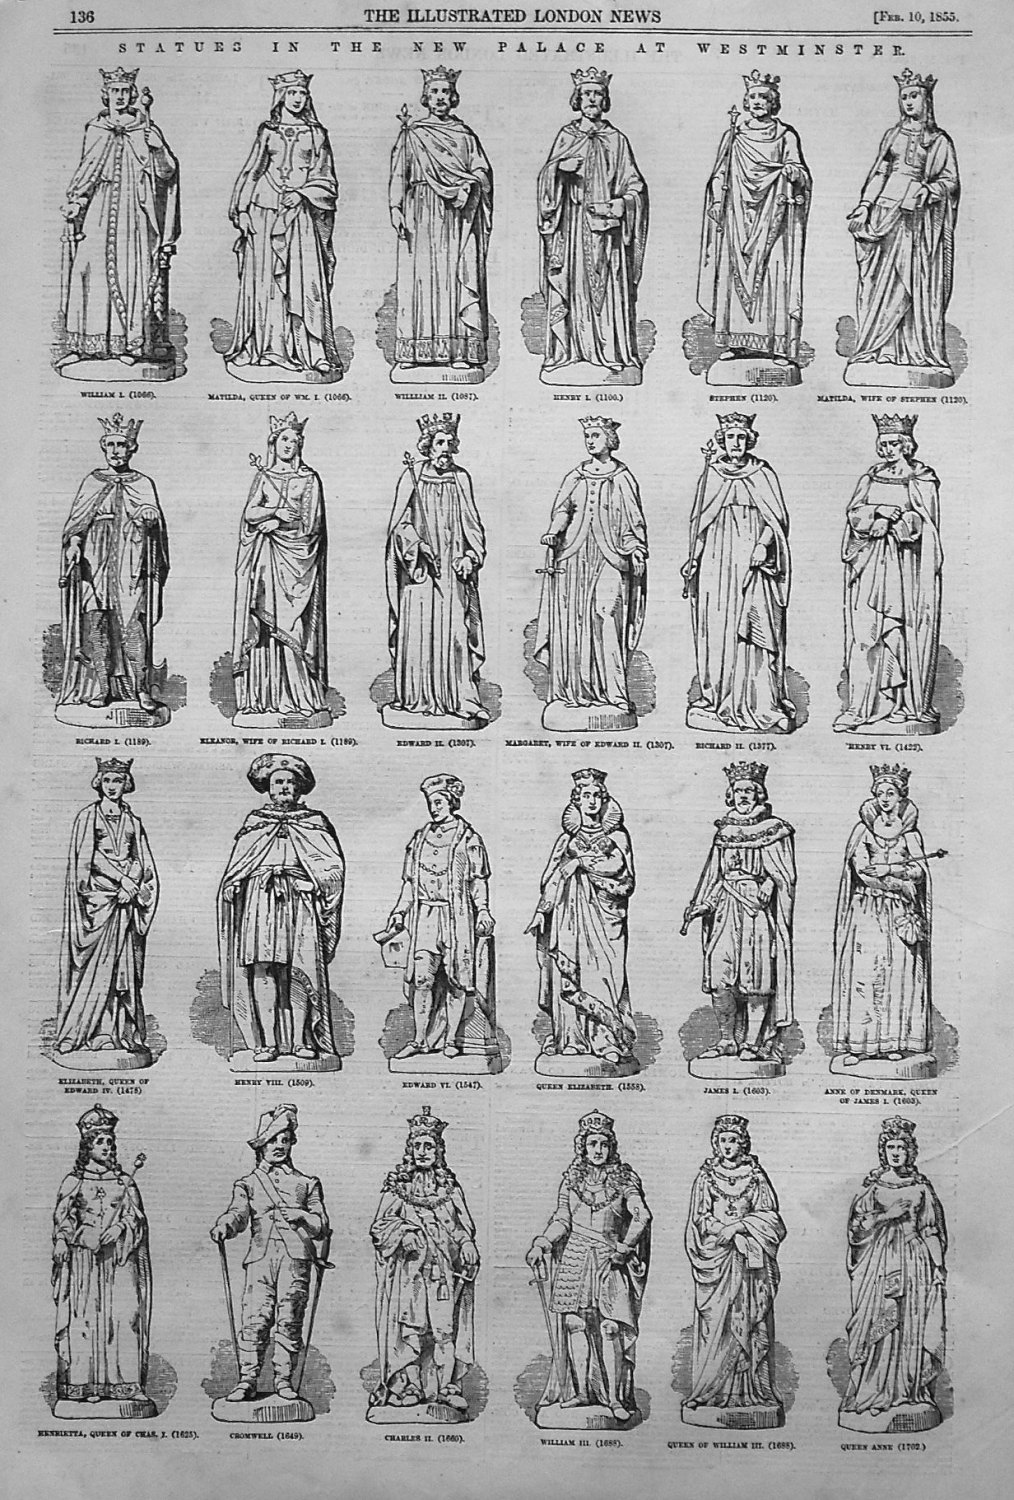 Statues in the New Palace at Westminster. 1855